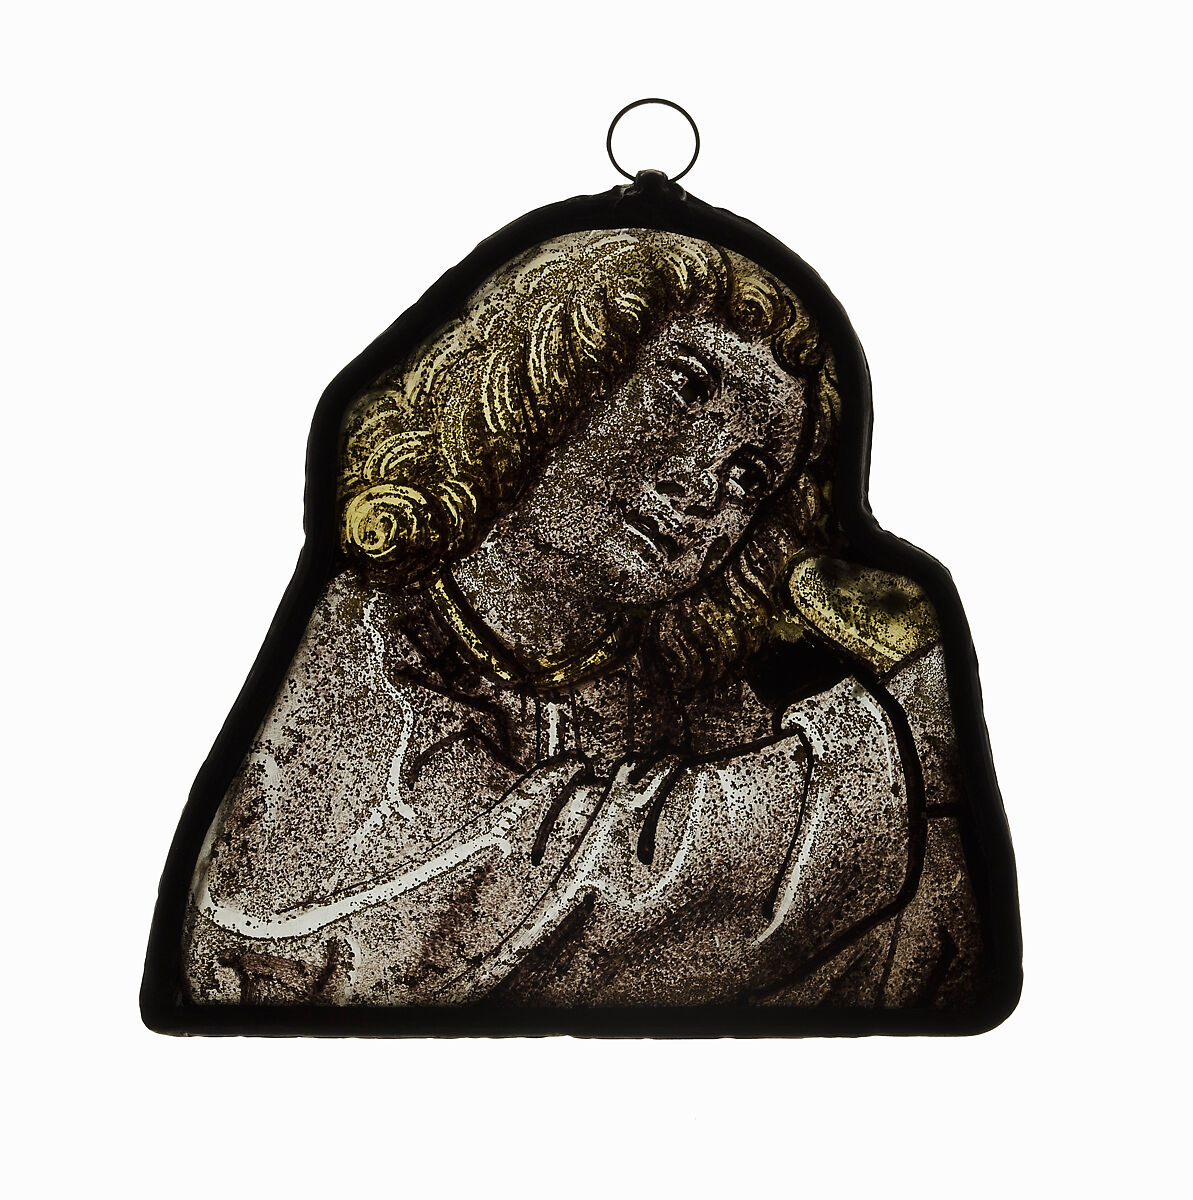 Glass Panel of Head of Angel, Clear glass, paint, silver stain, German or Swiss 